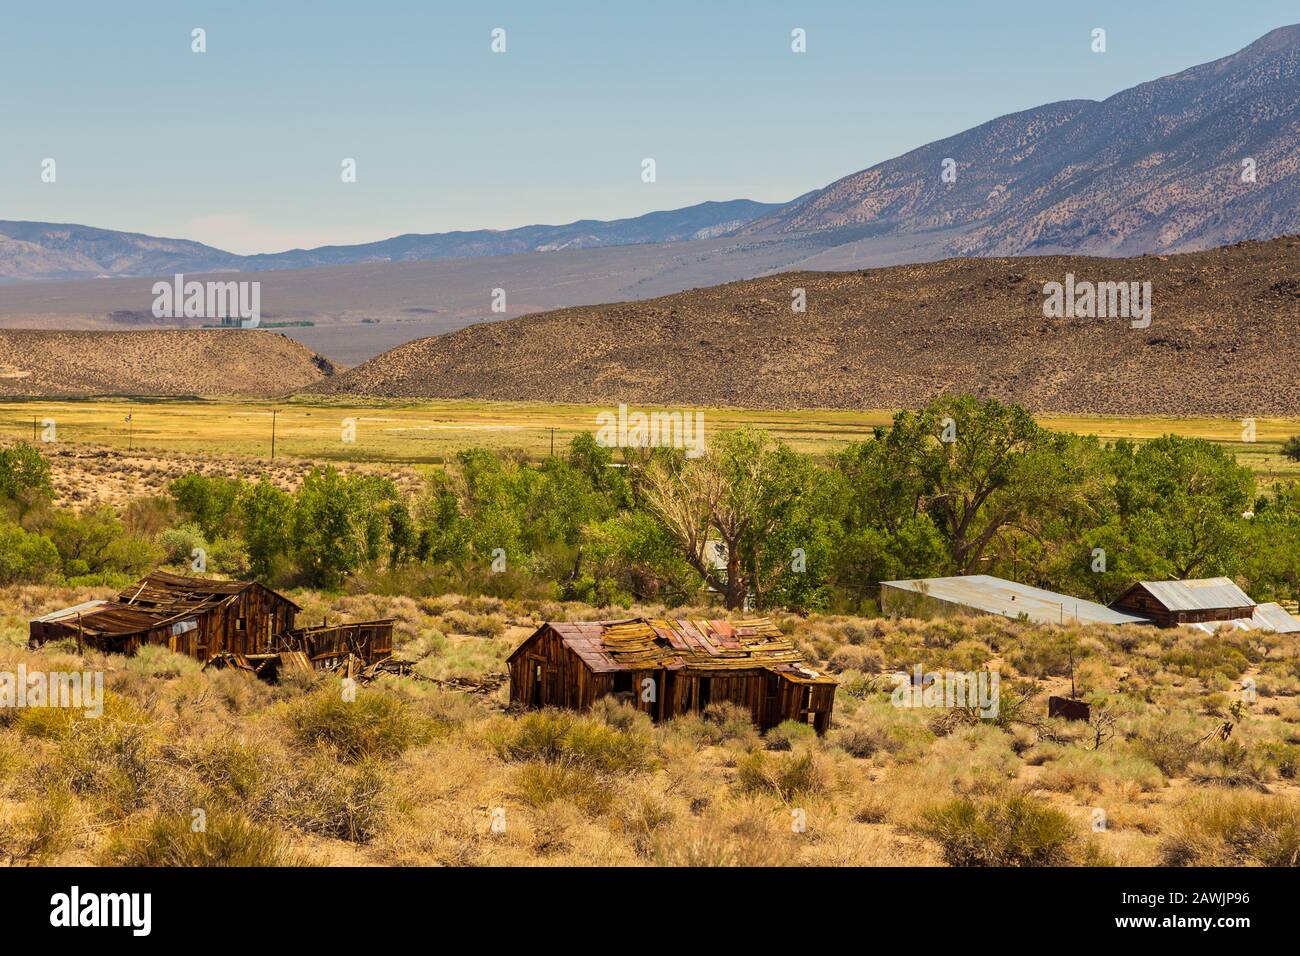 Old, wooden resort buildings next to hot springs. Snow-capped Sierra Nevada mountains in the background, Benton, California, USA. Stock Photo